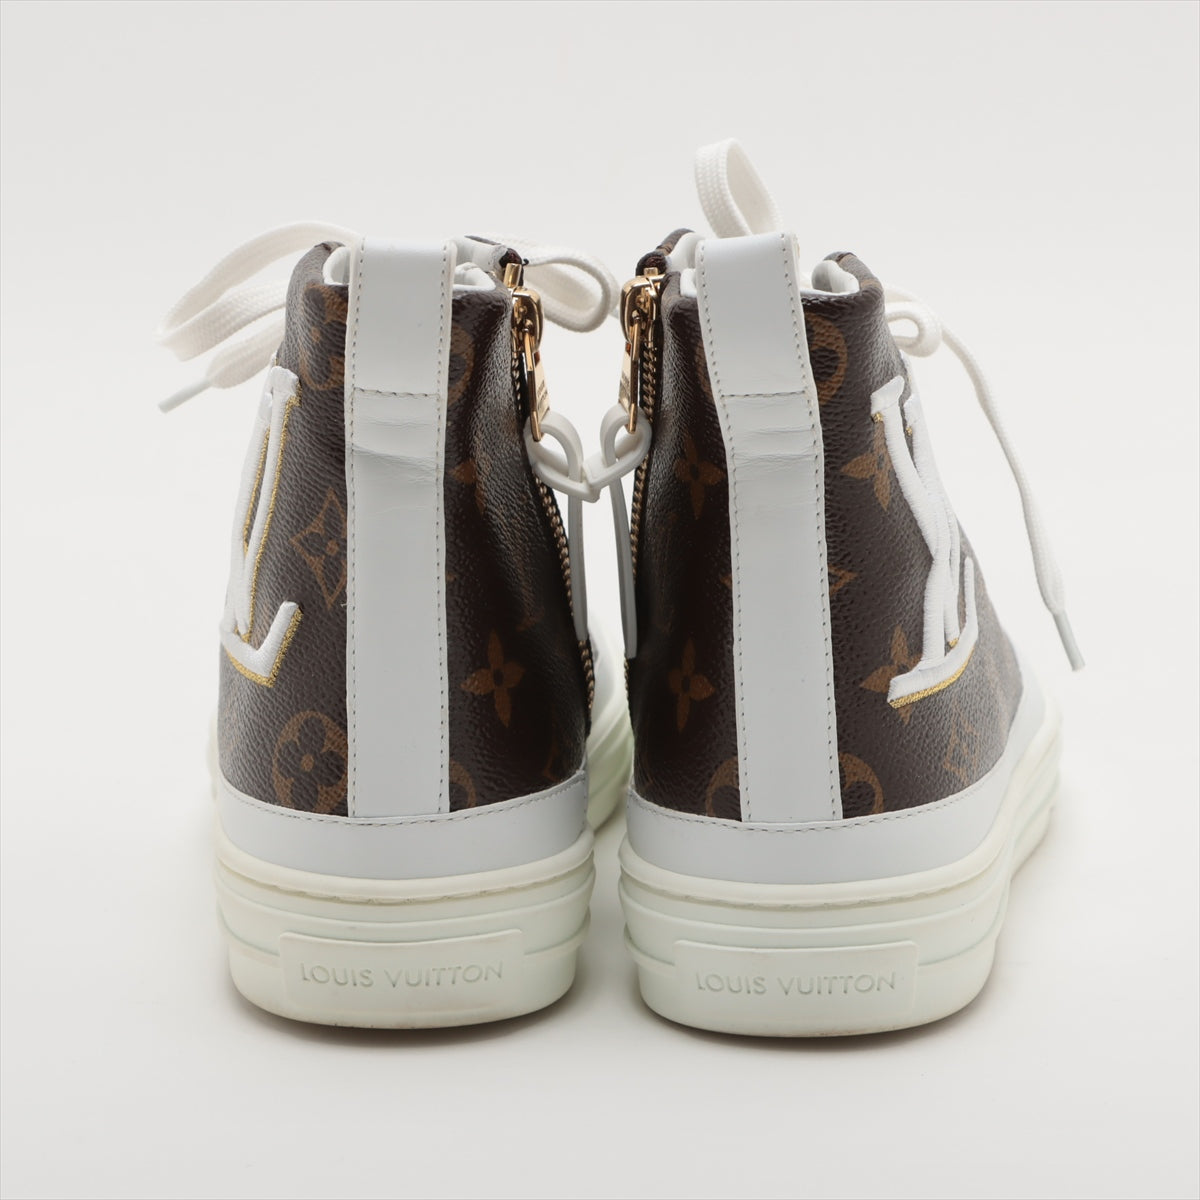 Louis Vuitton Stellar line 18 years Leather High-top Sneakers 37 Ladies' Brown CL0198 Monogram box sack Is there a replacement string